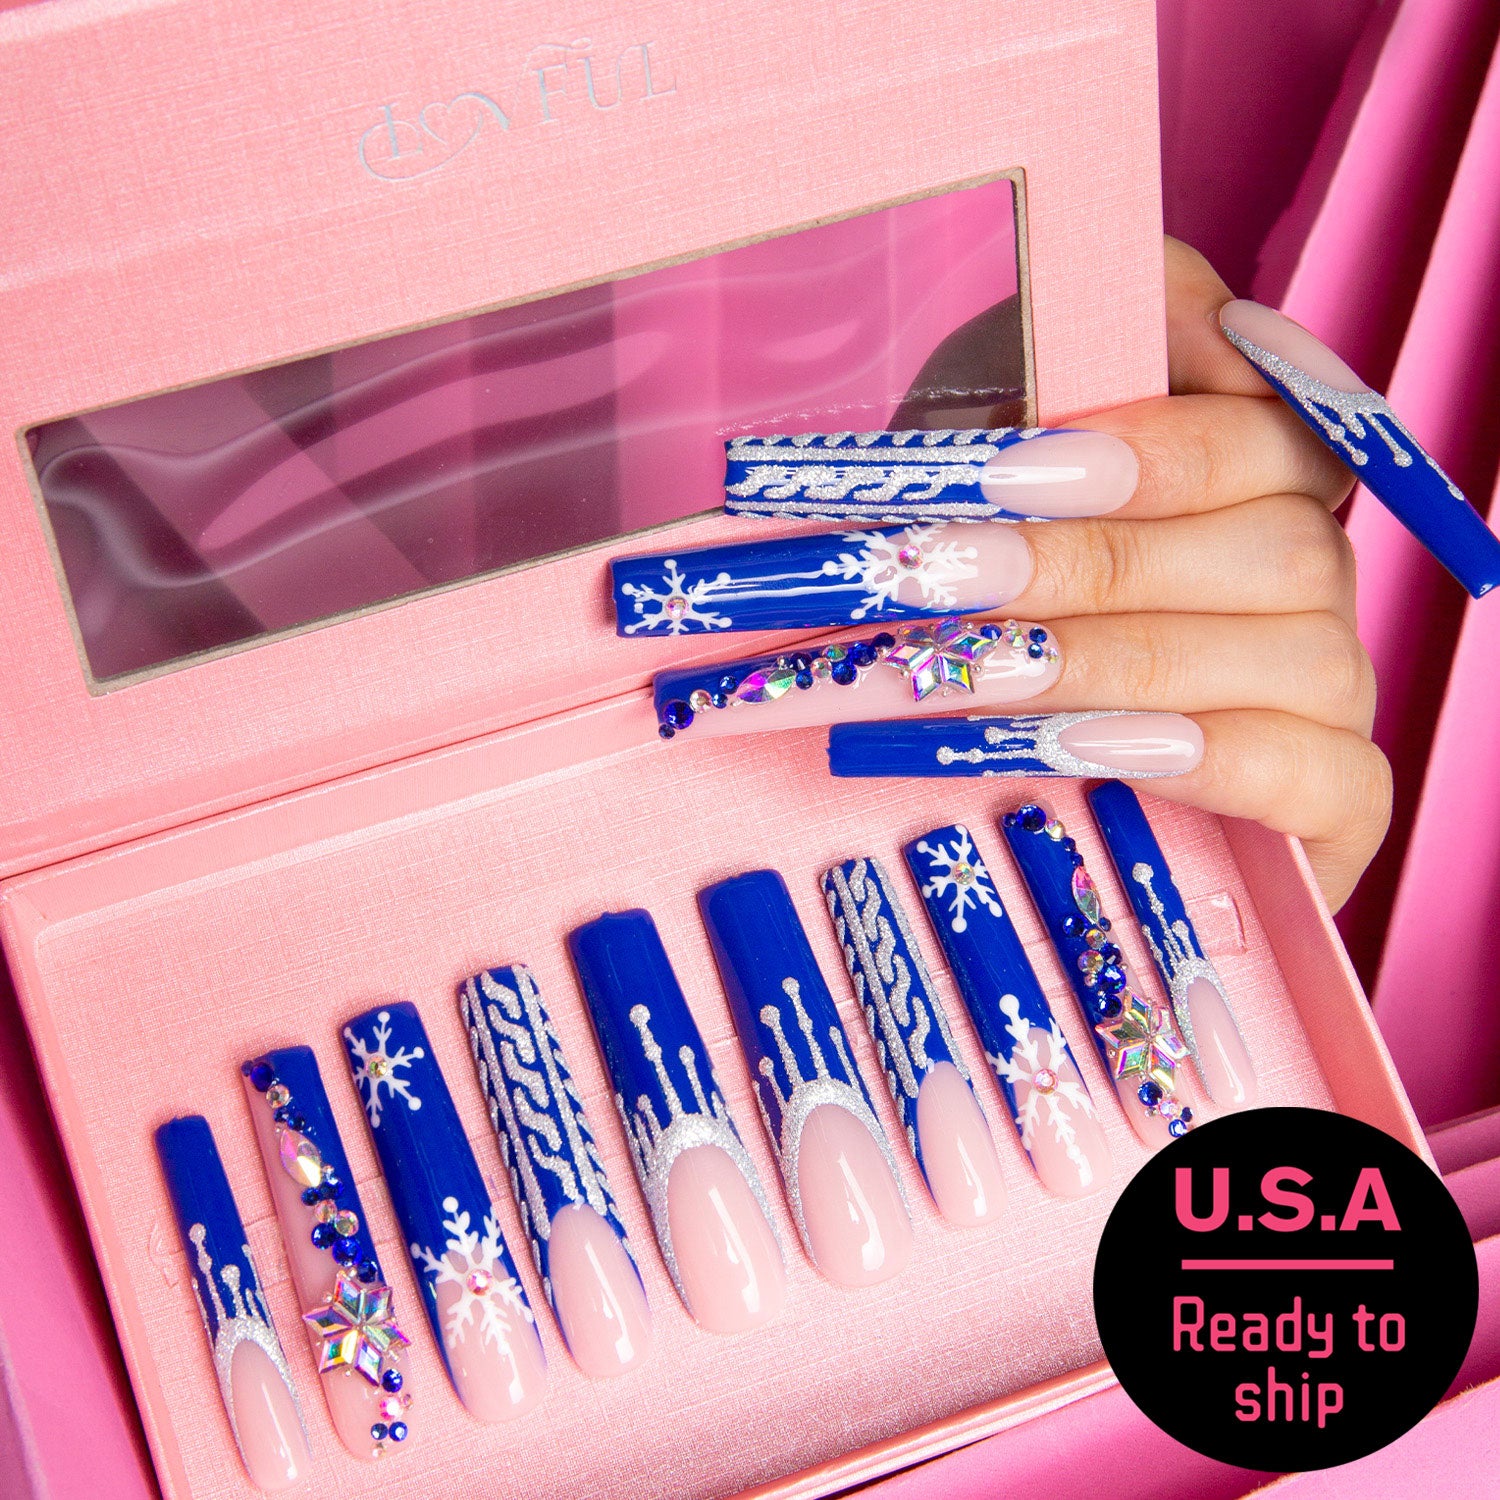 Close-up of a hand with blue press-on nails featuring white snowflake designs and colorful gemstones, arranged in a pink box with 'U.S.A Ready to ship' text.